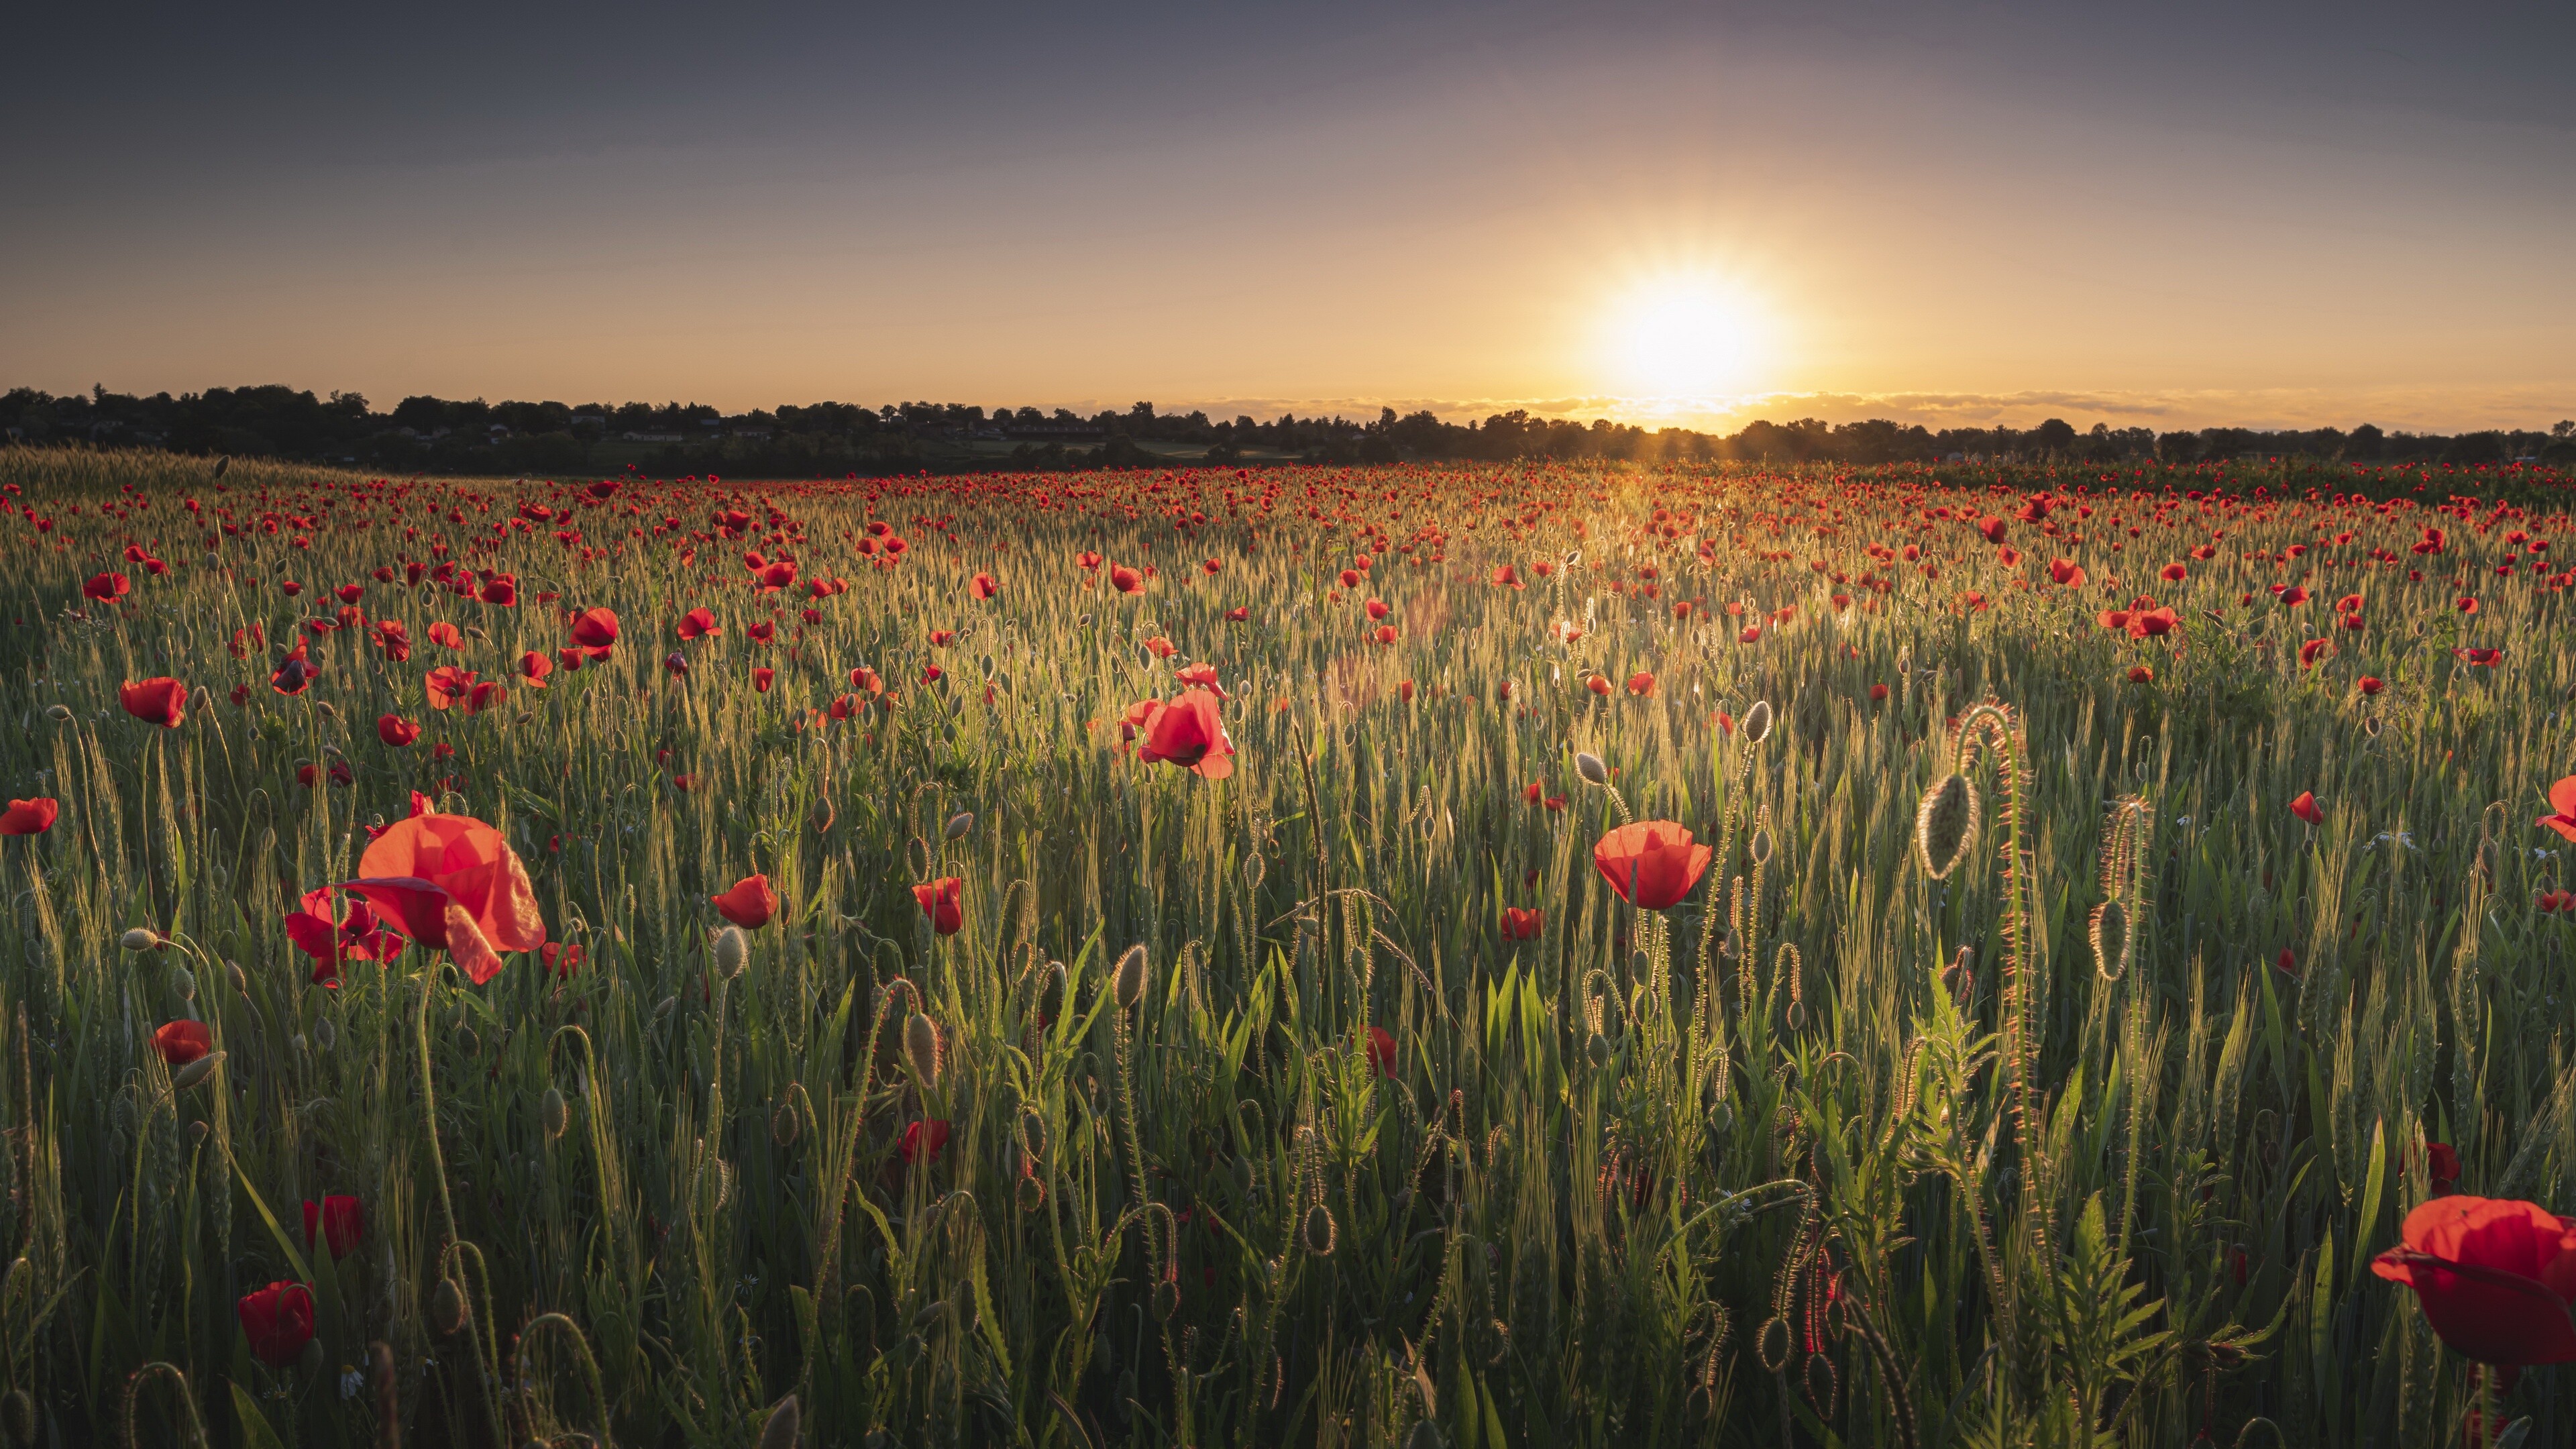 Poppy Flower: In the temperate zones, poppies bloom from spring into early summer. 3840x2160 4K Wallpaper.